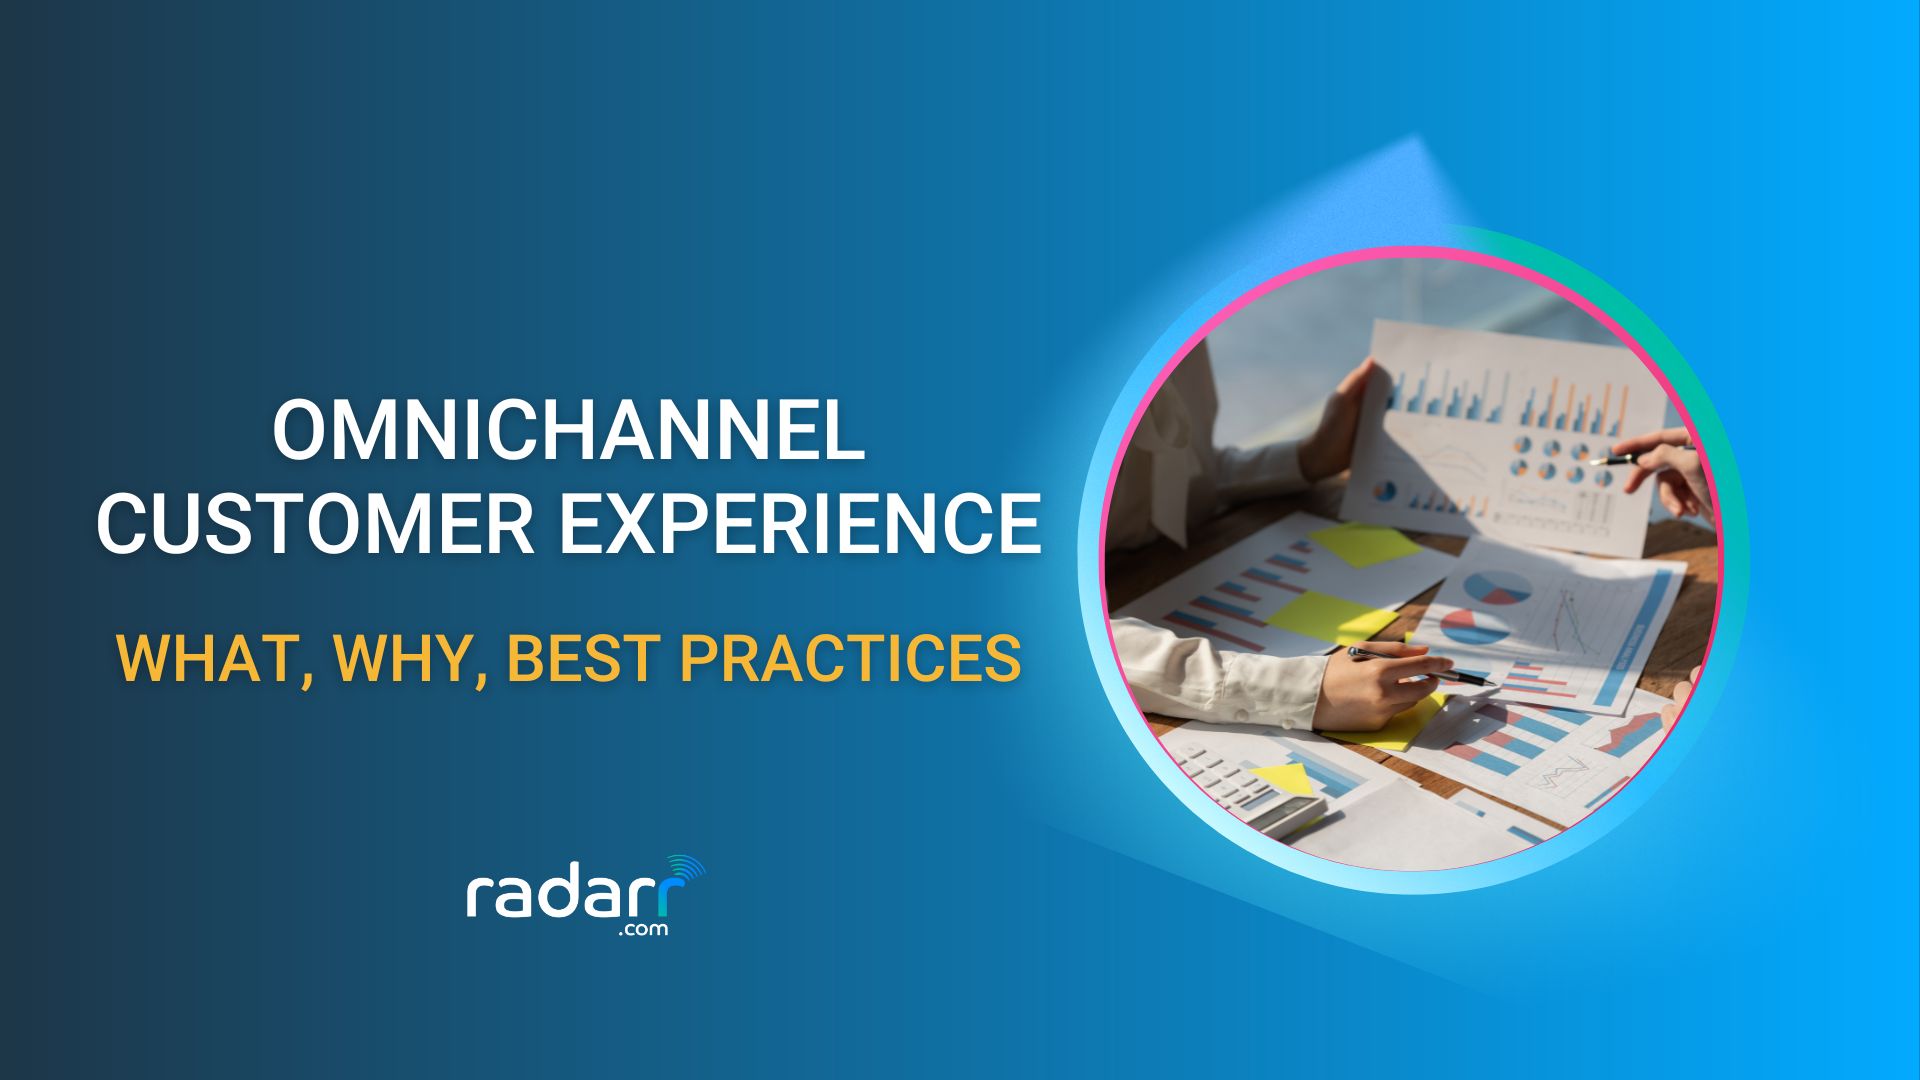 omnichannel customer experience - what, why and best practices